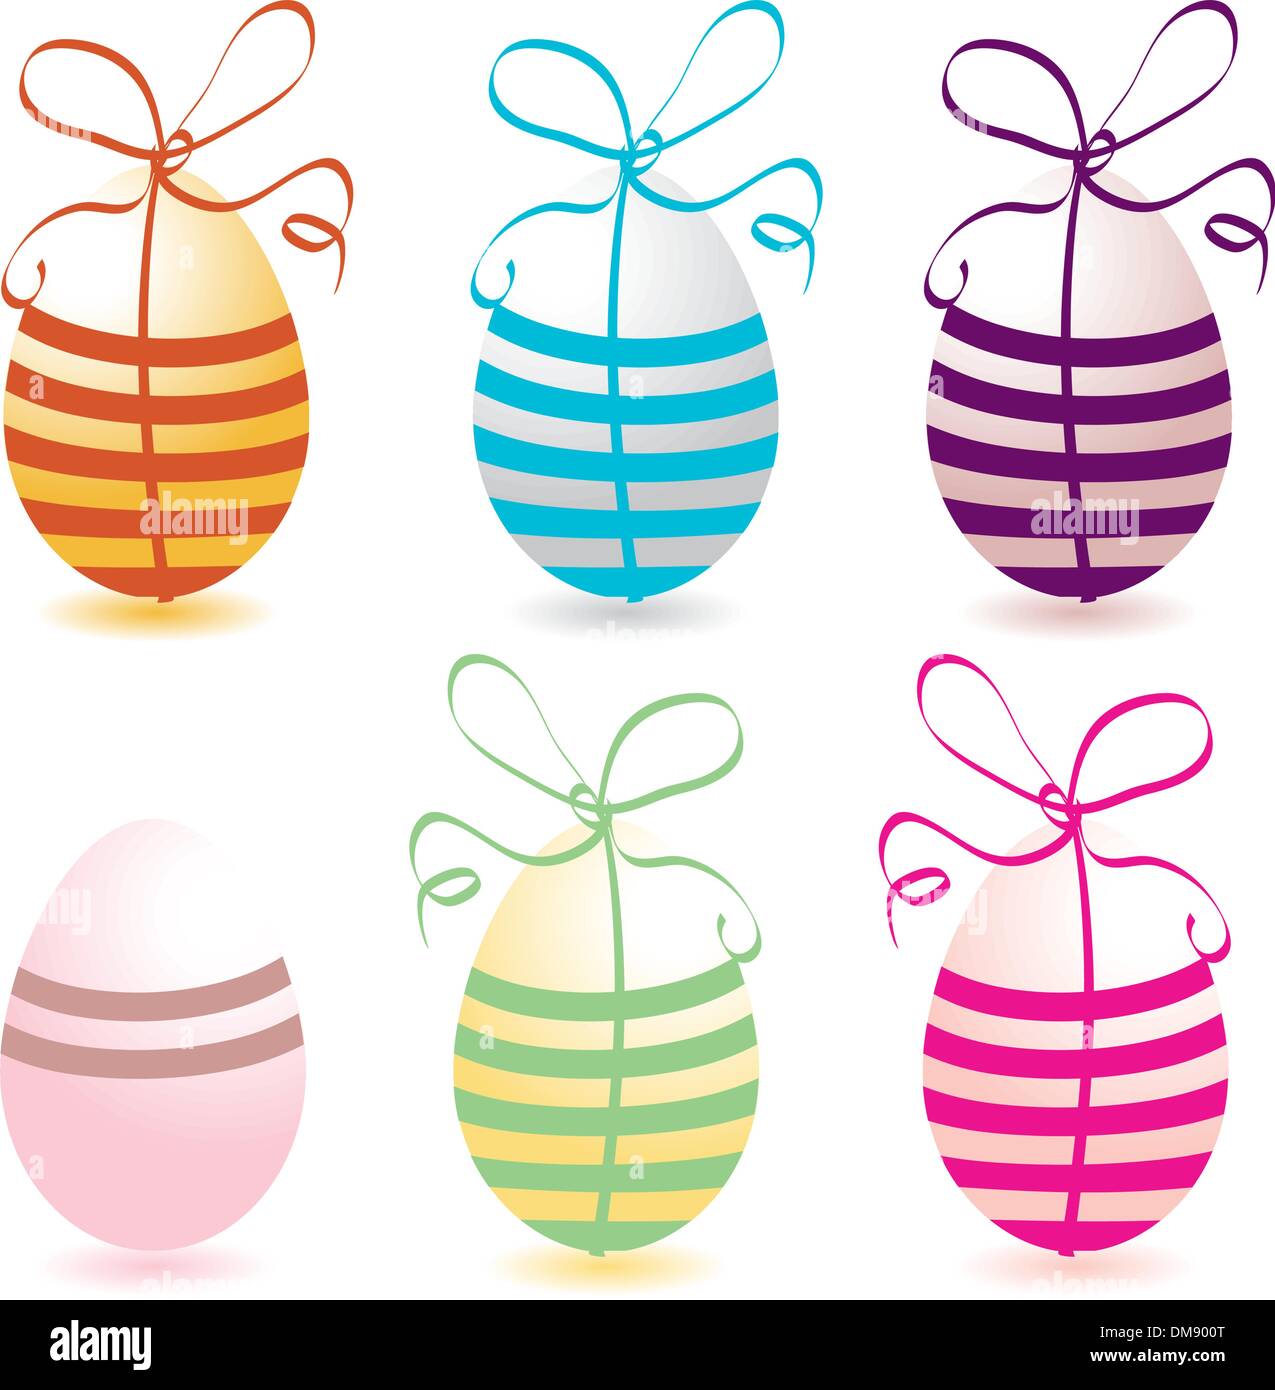 Easter eggs collection for your design Stock Vector